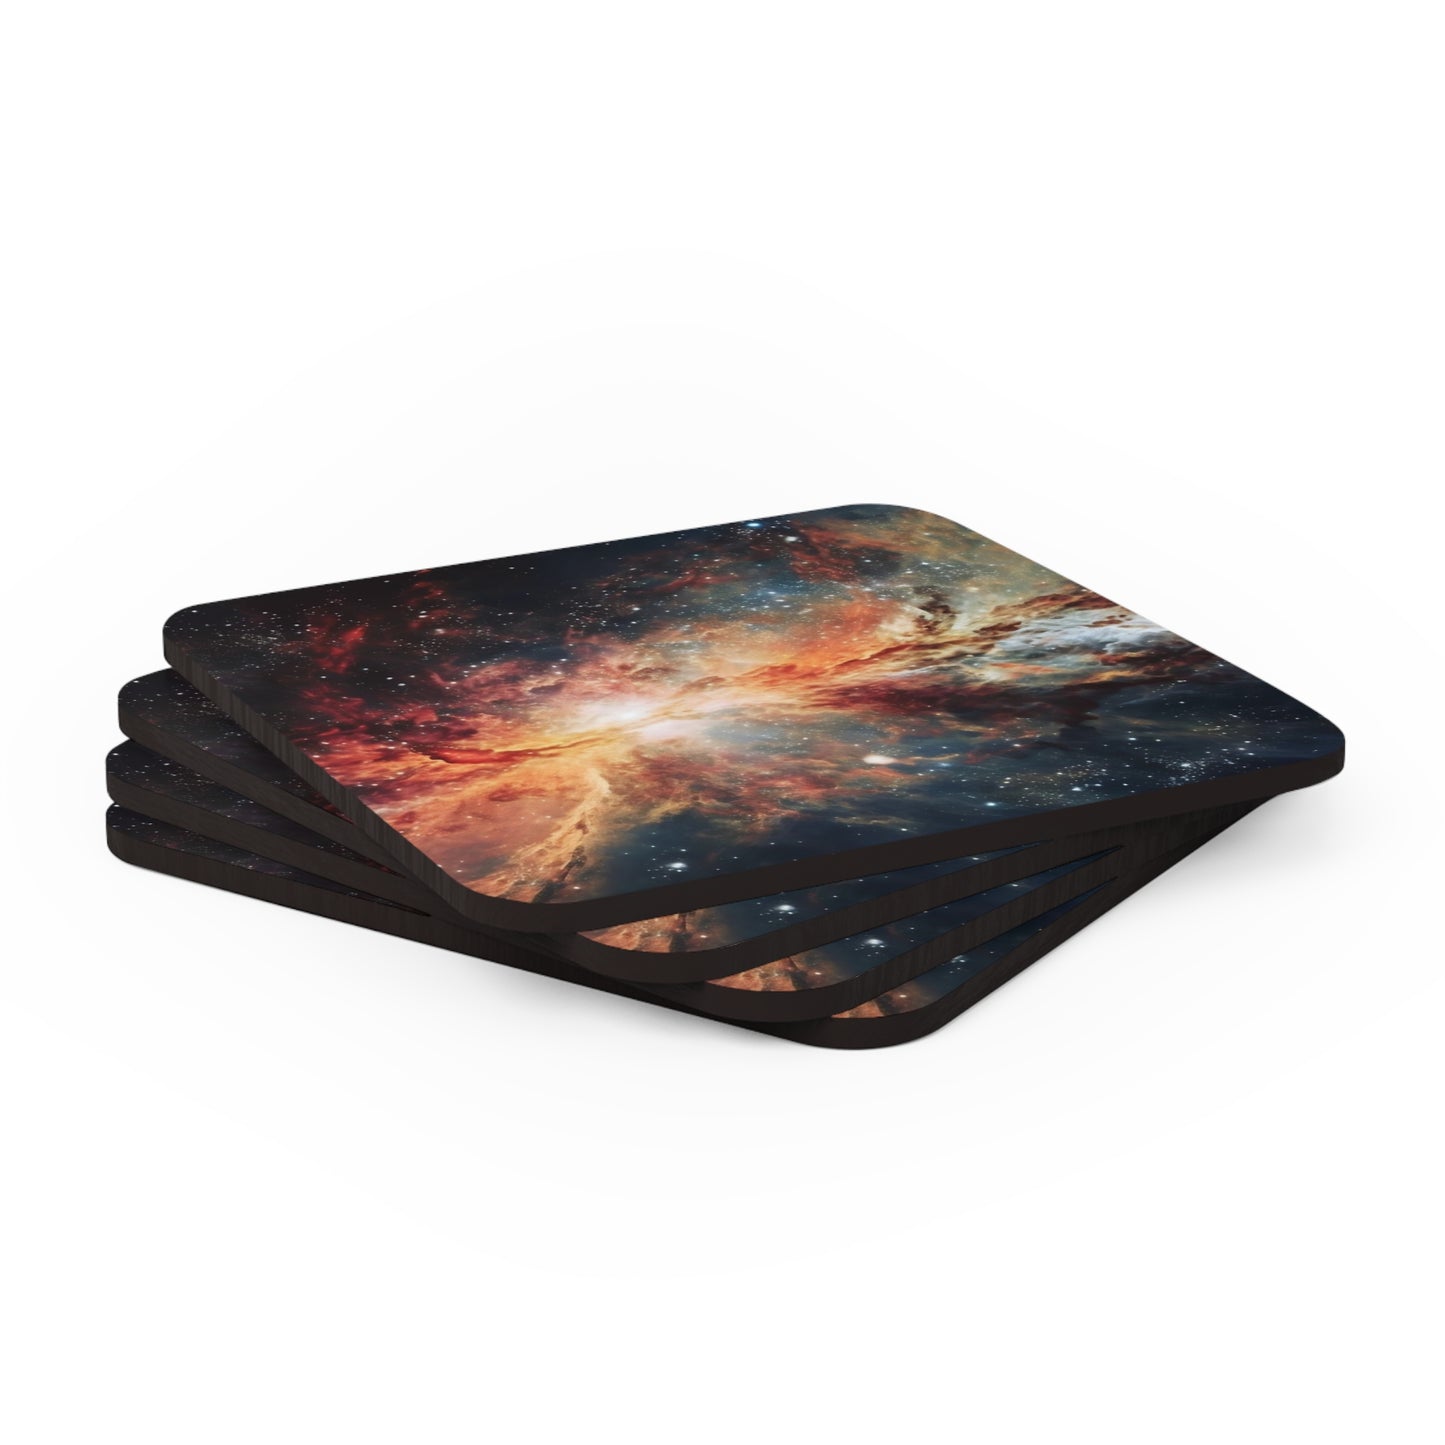 Nebula Coasters Set of 4, Deep Space Coffee Table Decor, Gift for Astronomers, Universe Tea Coffee Cup Mats, Housewarming Gift, Science Gift